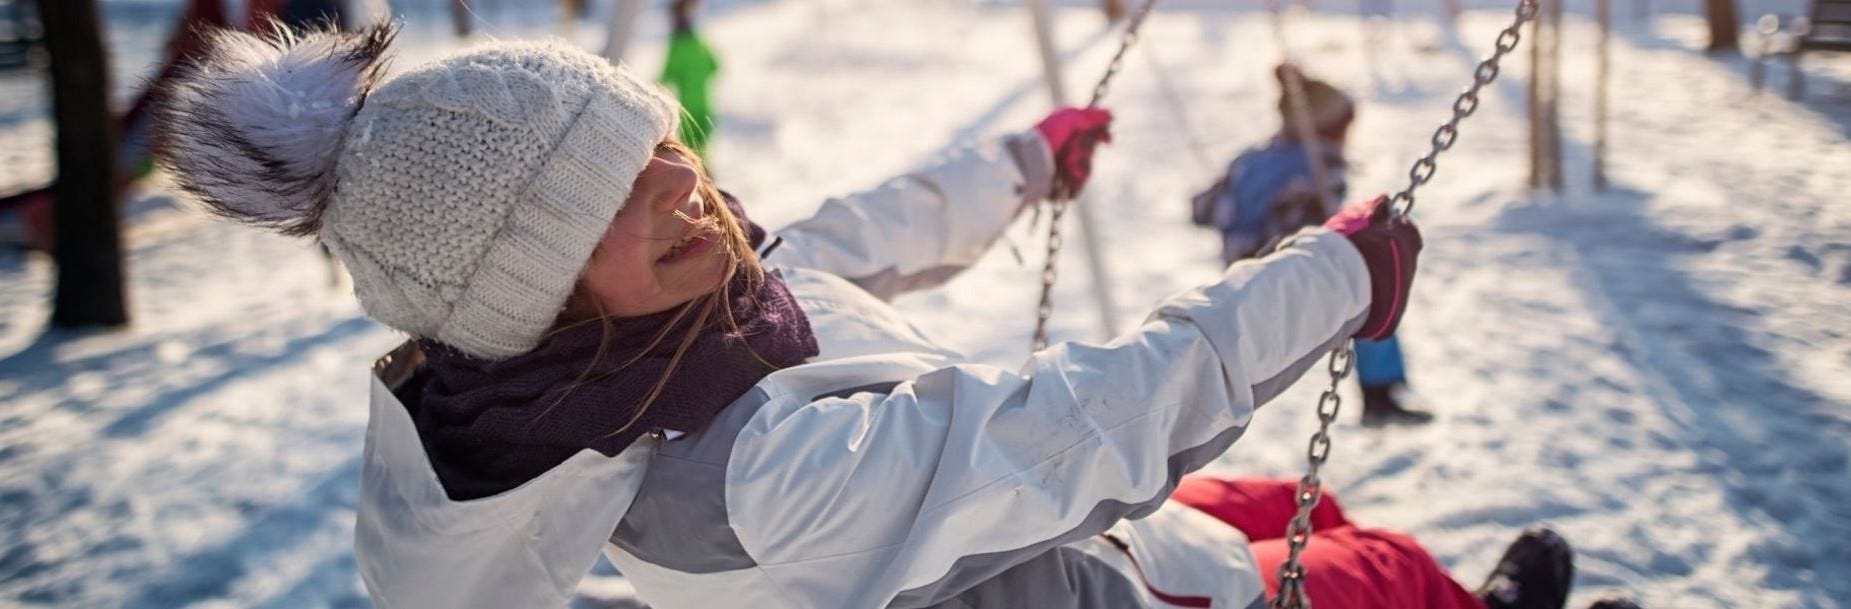 How to Keep Kids Playing Outdoors During the Winter